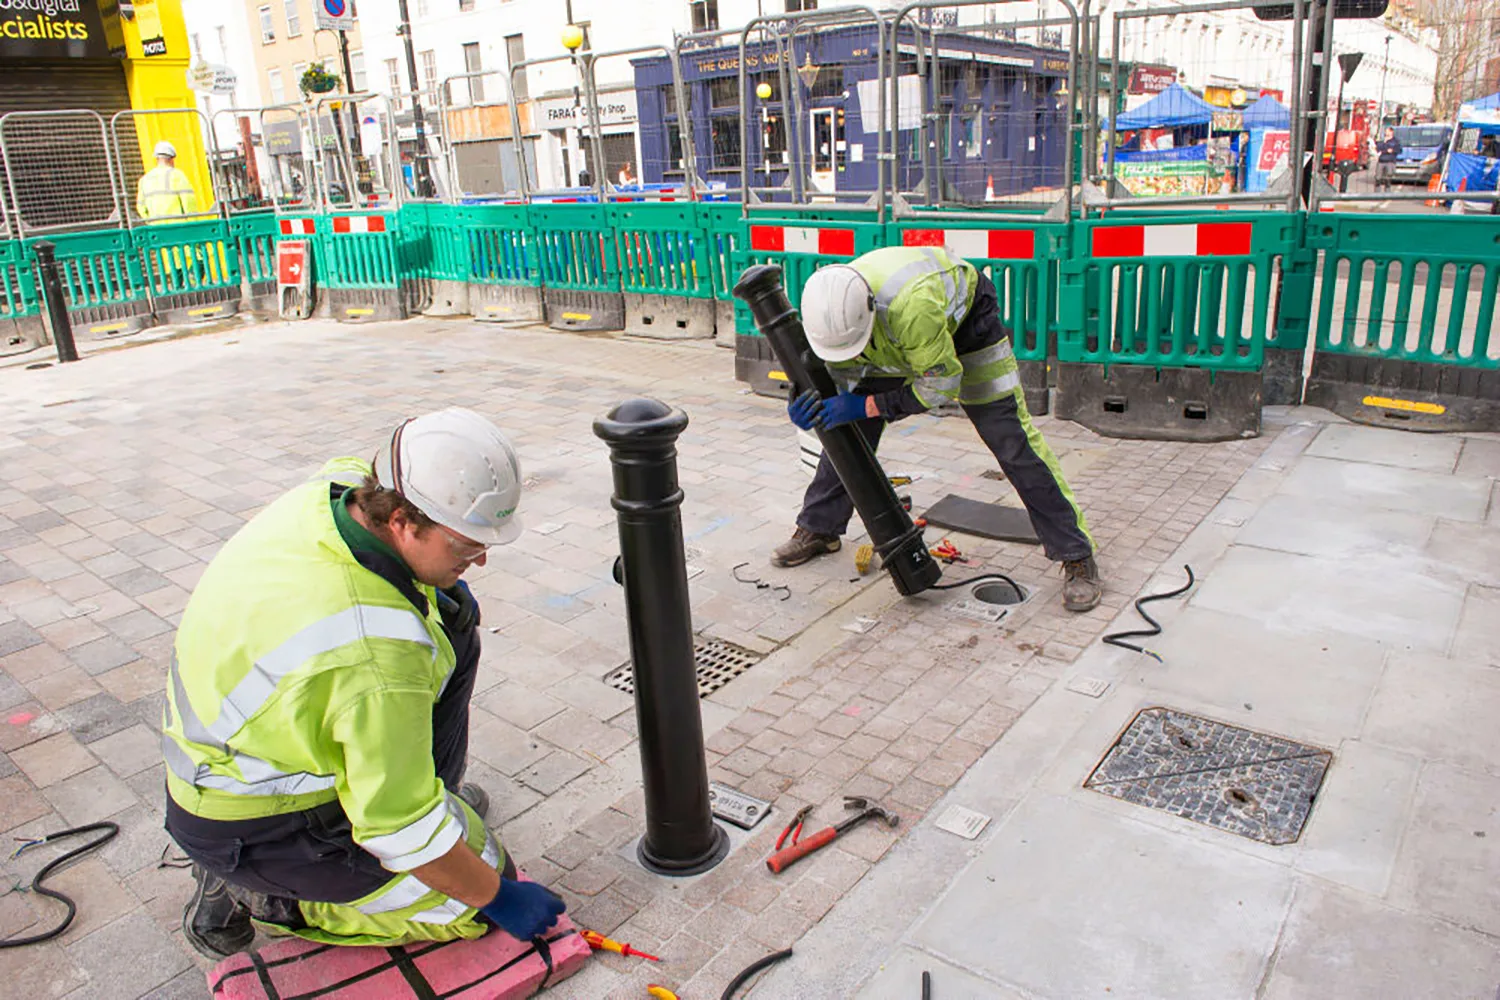 Two electricians are installing ubitricity bollard charge points at Tachbrook Market, London, one of ubitricity's UK projects.